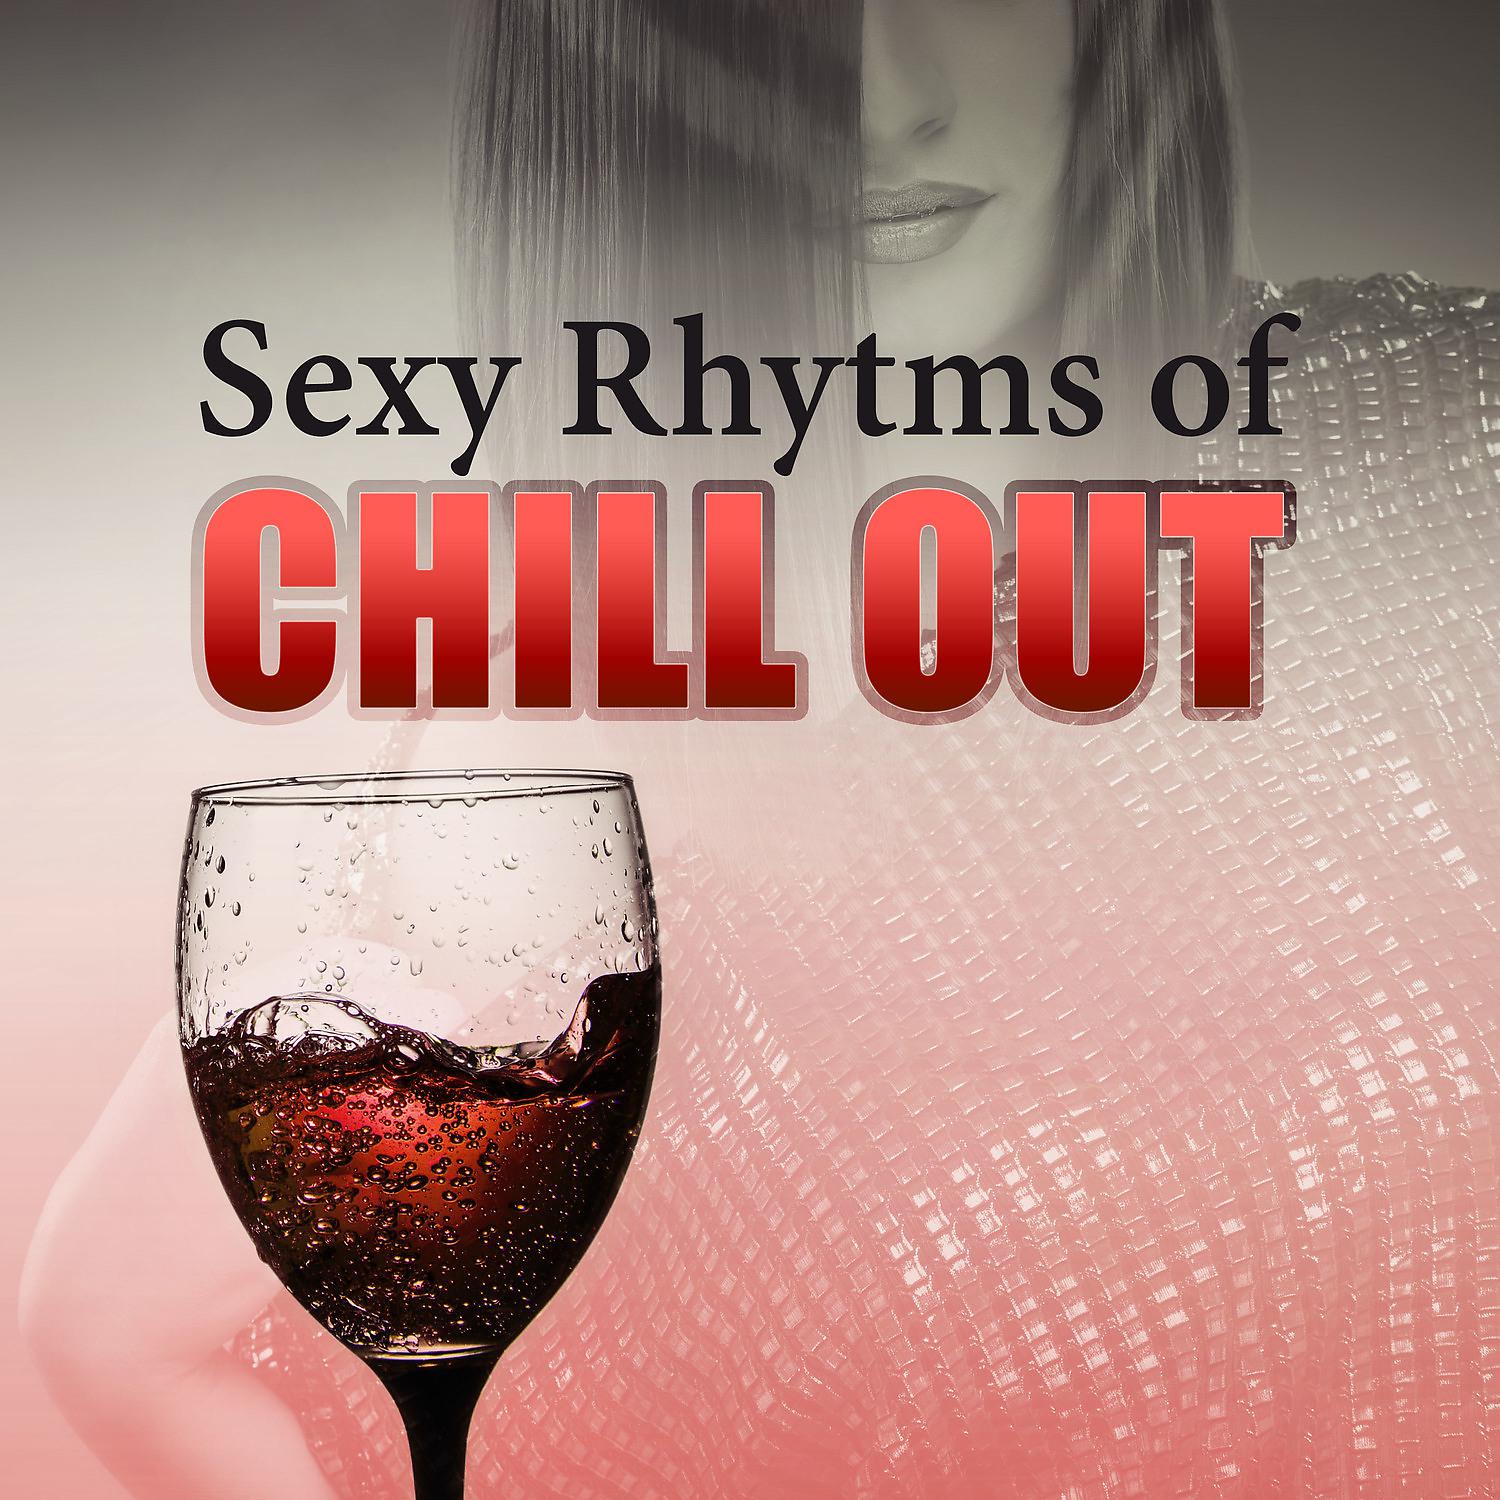 Постер альбома Sexy Rhytmhs of Chill Out – Best Sexy Chill Out Music, Beach Party, Chill Out Lounge Music, Summer Party Cocktail Lounge, Positive Energy Chill Tone, Early Sunrise